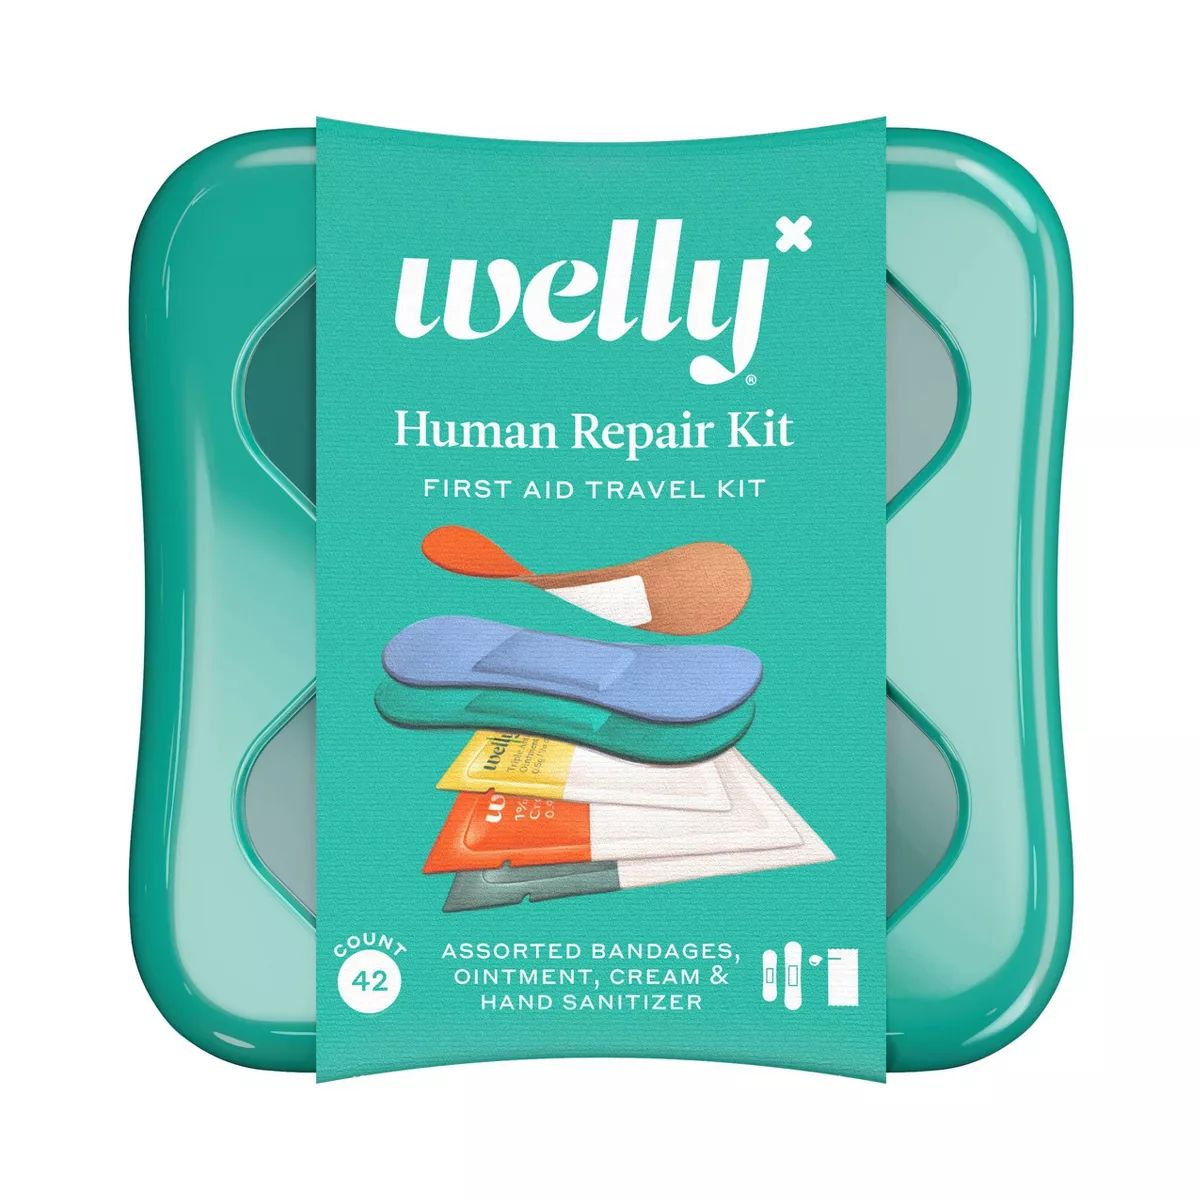 Welly Human Repair Kit First Aid Travel Kit - 42ct | Target